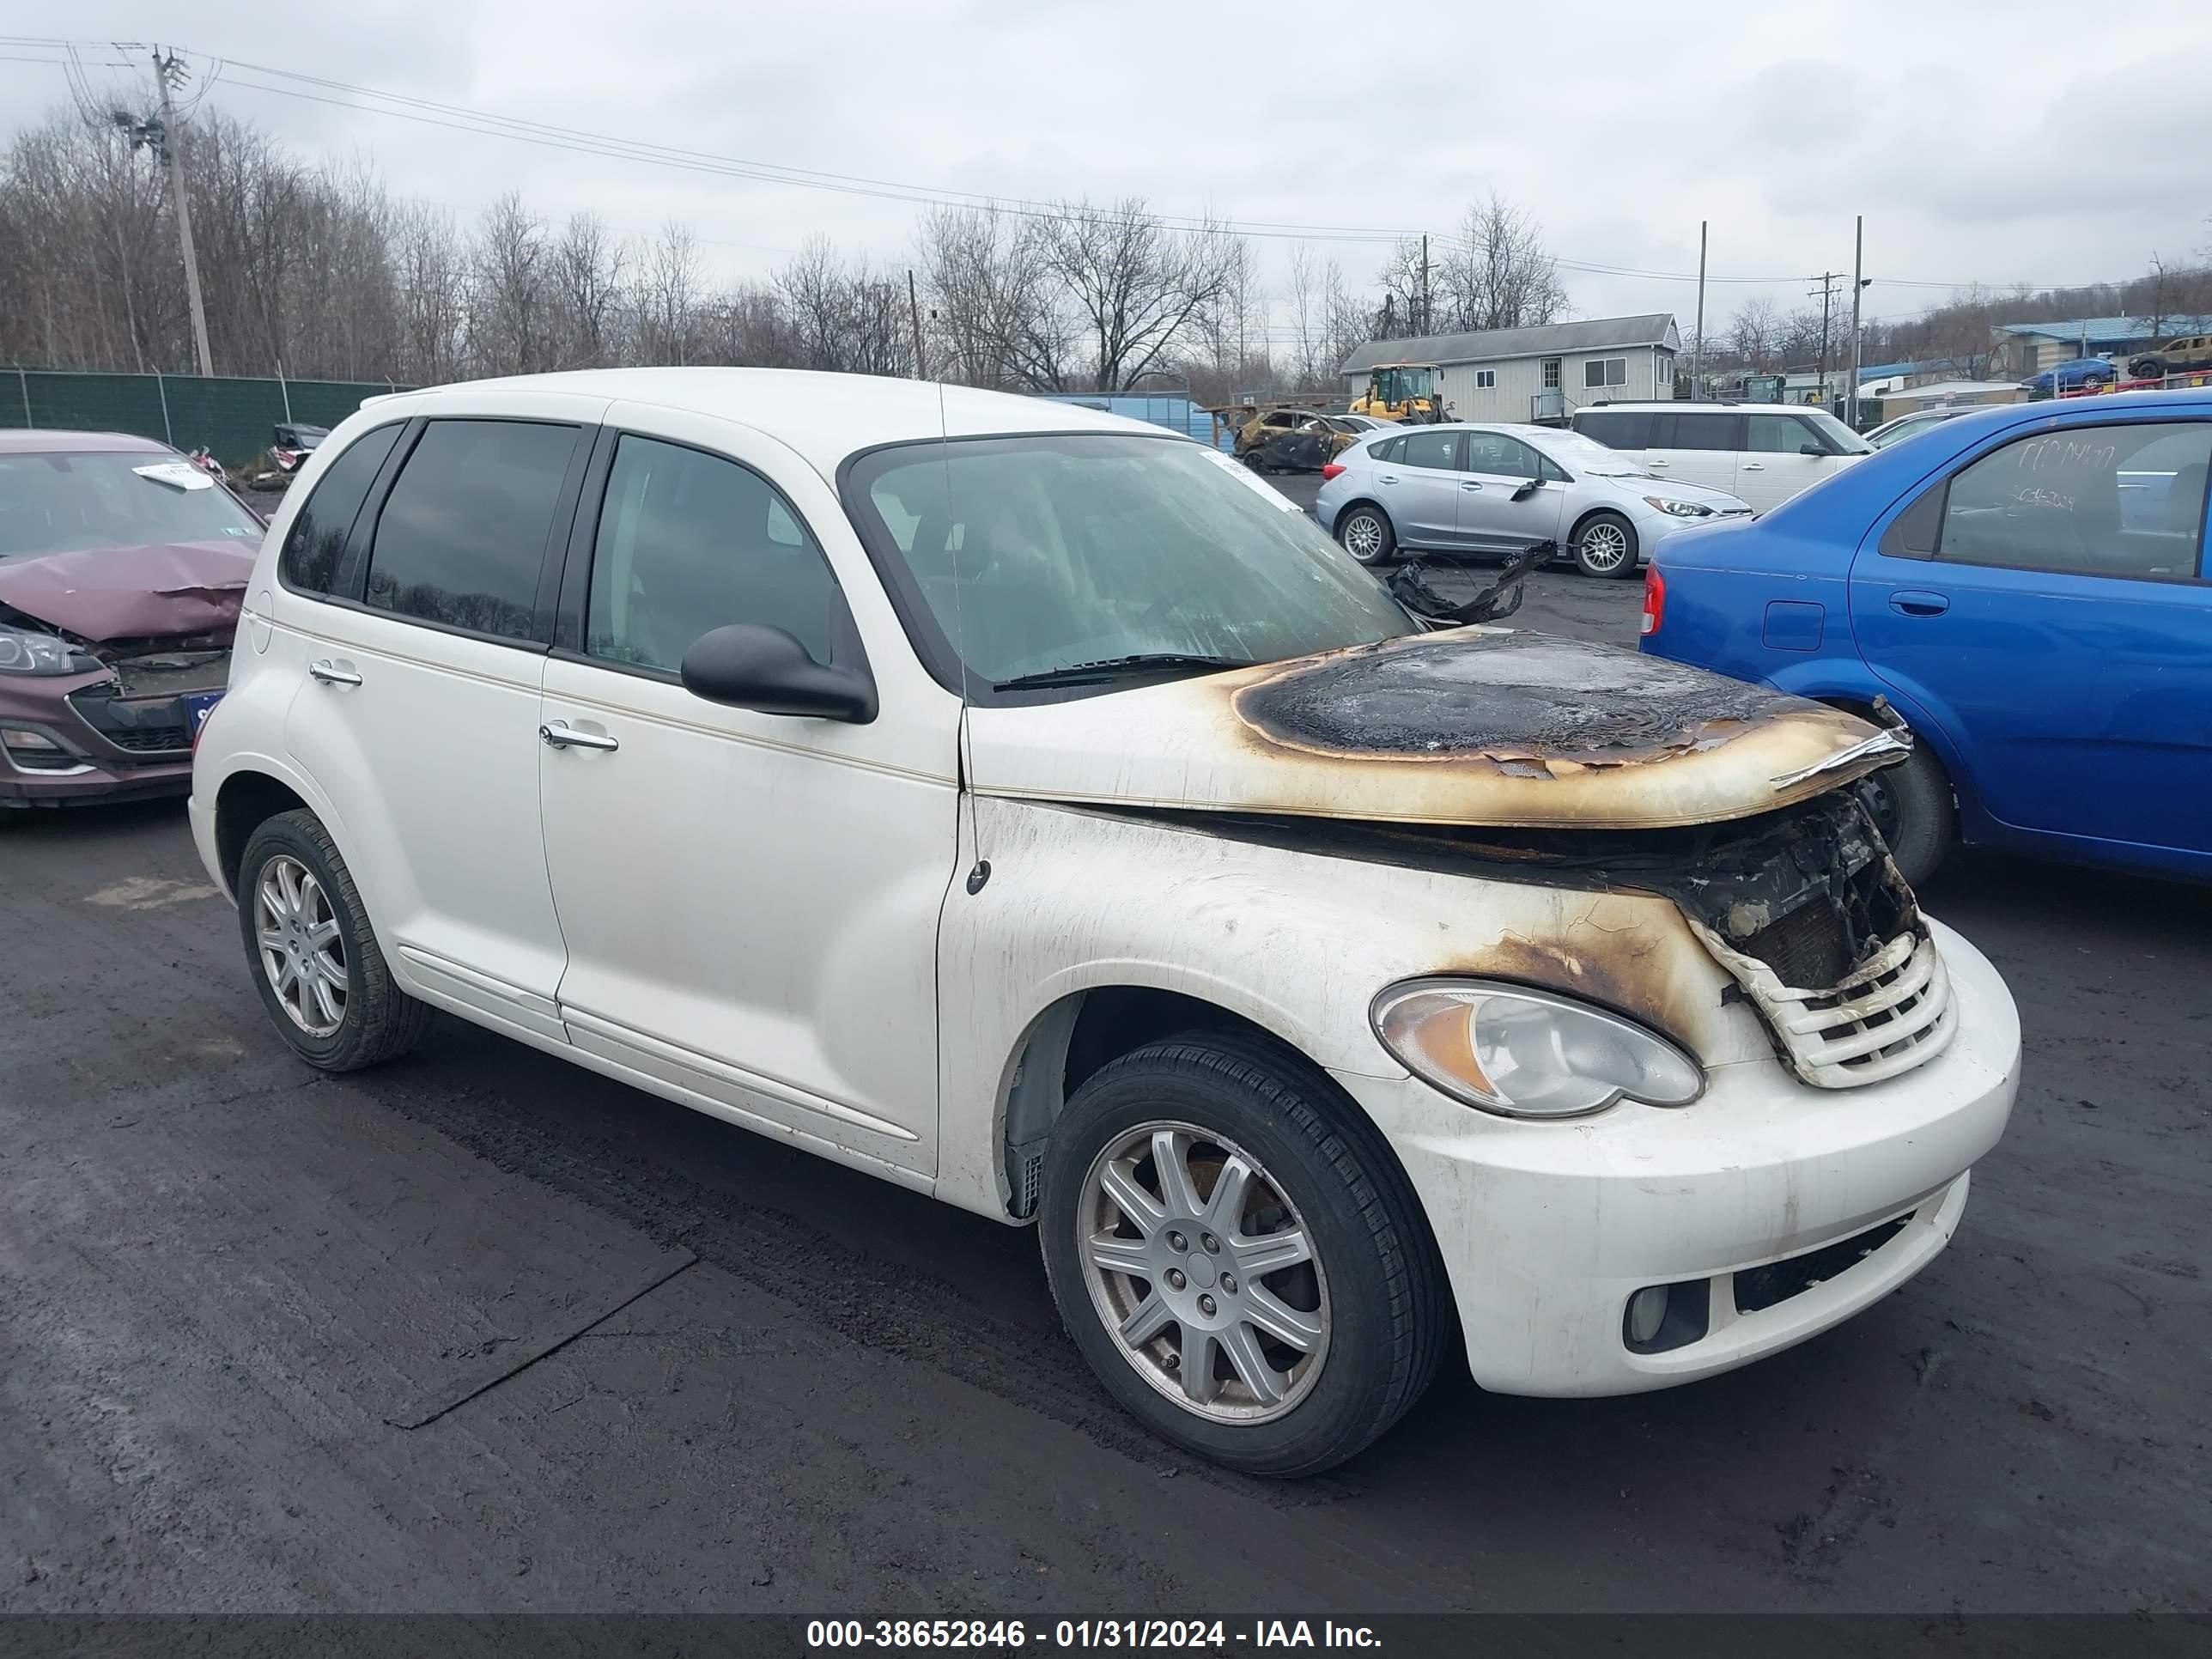 vin: 3A8FY58999T598259 3A8FY58999T598259 2009 chrysler pt cruiser 2400 for Sale in 18640, 103 Thompson St, Pittston, USA